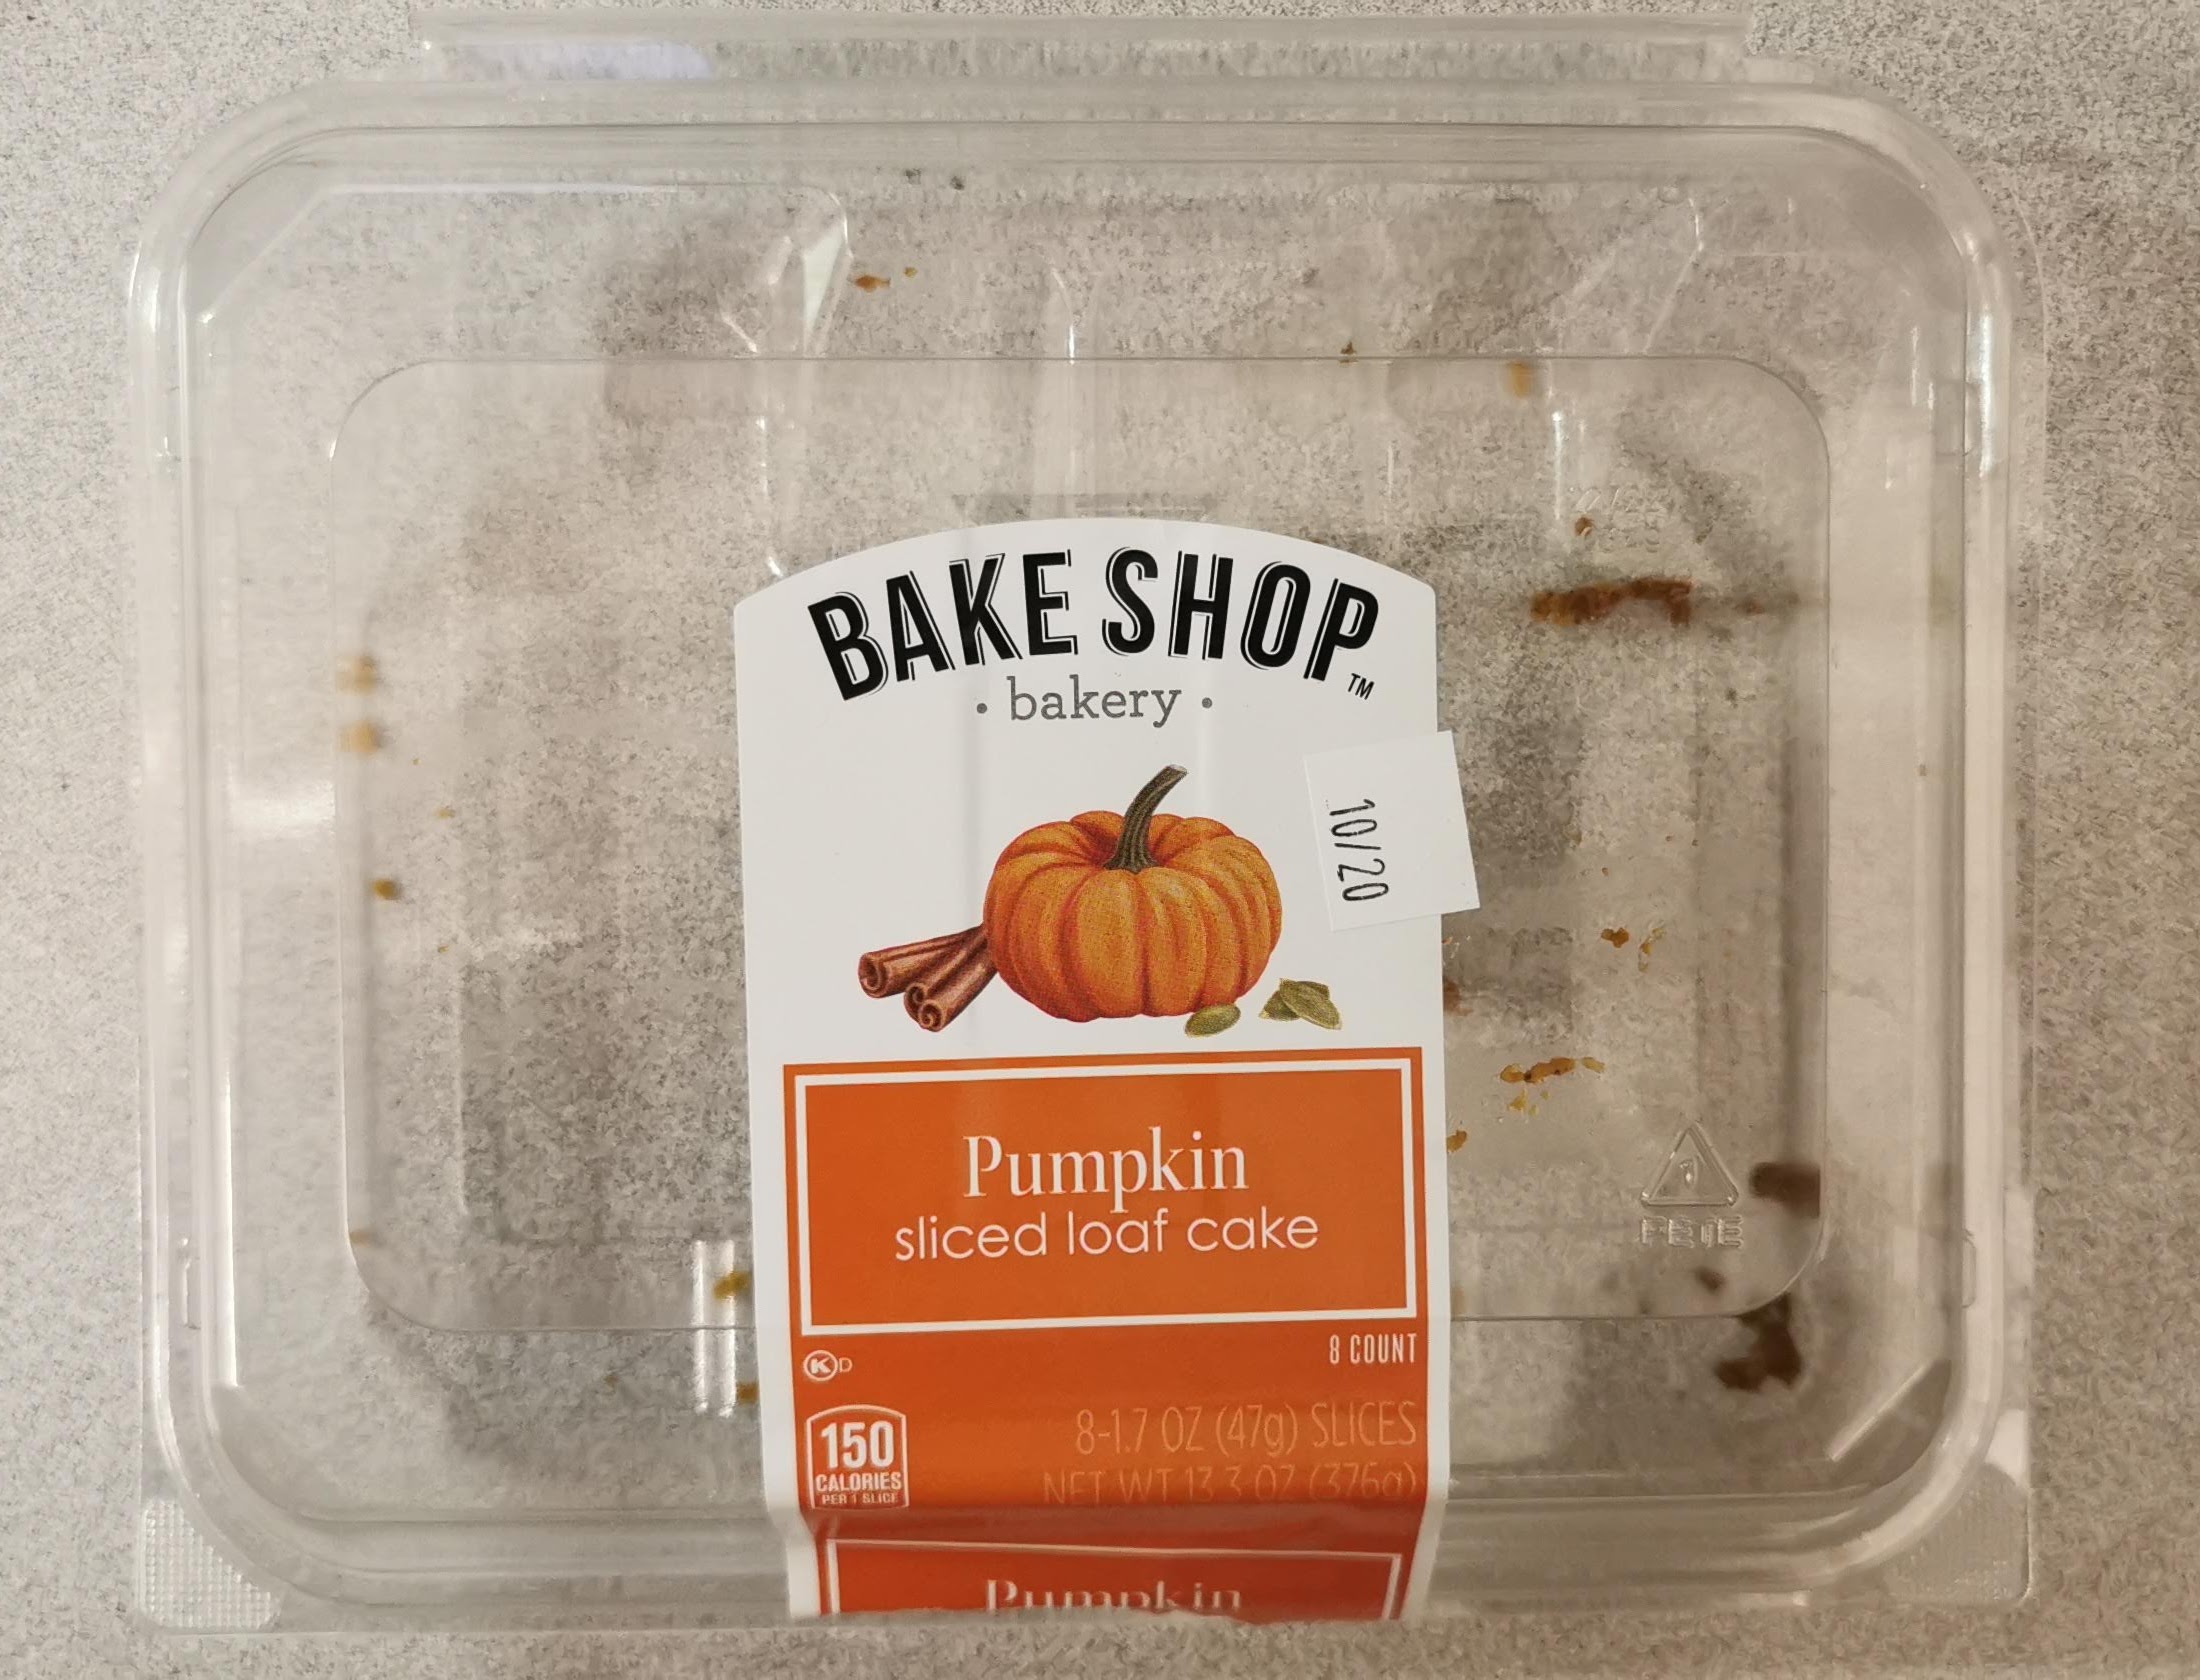 You are currently viewing Bake Shop Bakery Pumpkin Sliced Loaf Cake (Aldi)